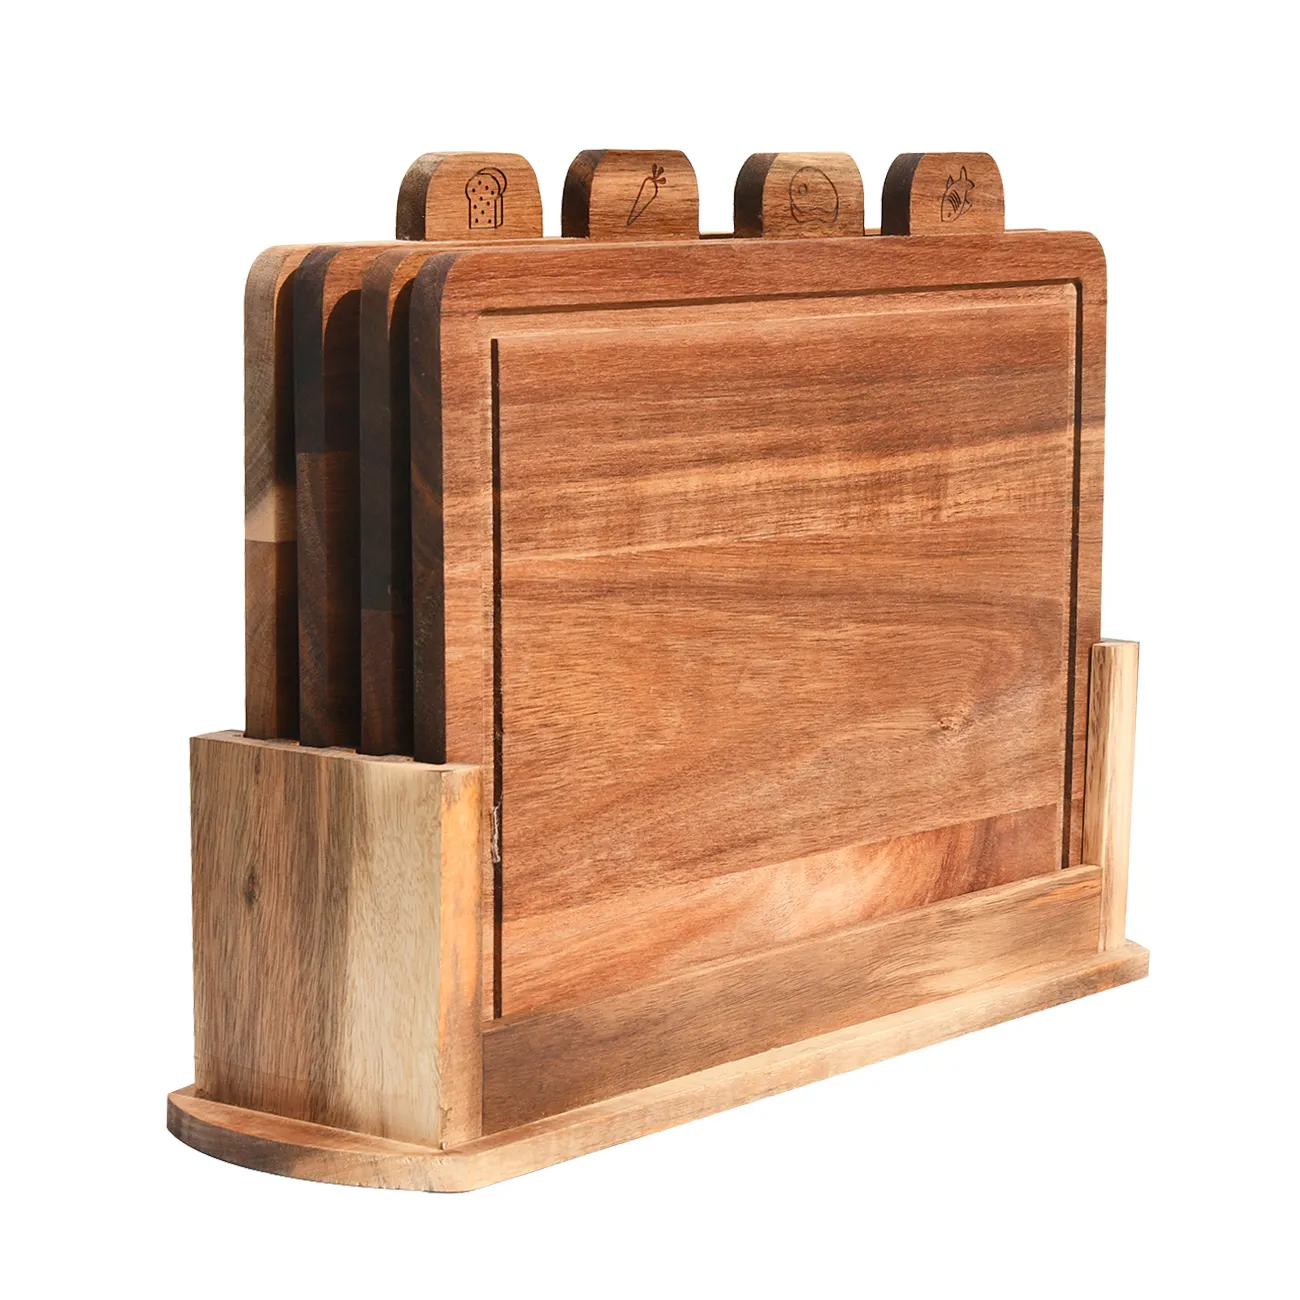 Sturdy Organic Acacia Wood Index Cutting Board Set With Storage Base Holder For Bread, Meat, Vegetables, Fish